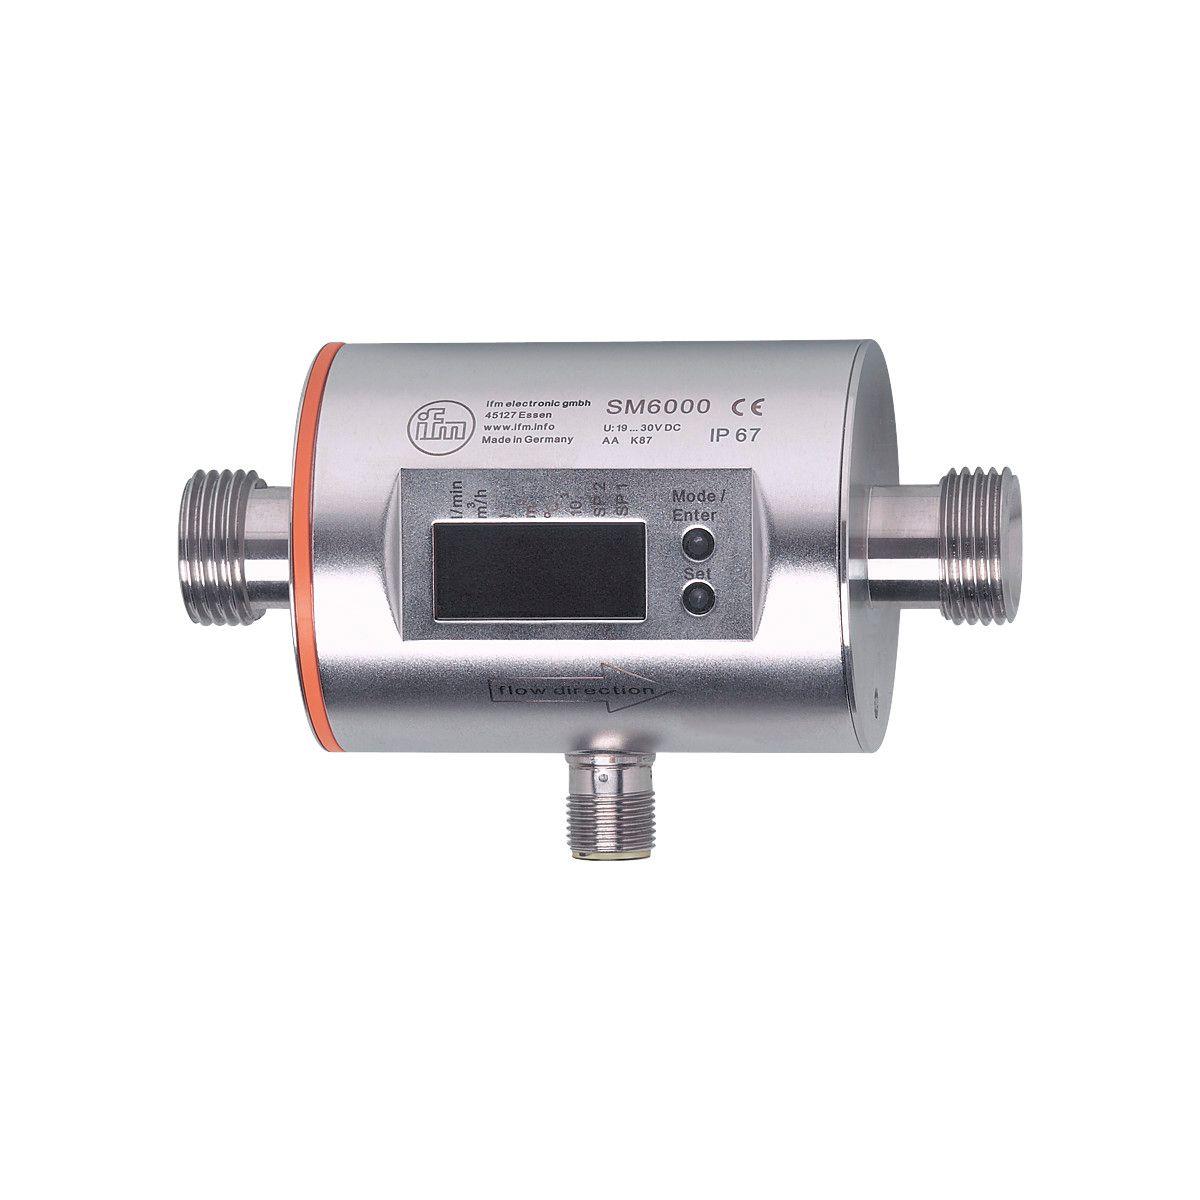 ifm Electronic SM6000 Magnetic-inductive flow meter, Number of inputs and outputs: Number of digital outputs: 2; Number of analog outputs: 1, Measuring range: 0.1...25 l/min 0.005...1.5 m³/h, Process connection: threaded connection G 1/2 DN15 flat seal, System: gold-plated con